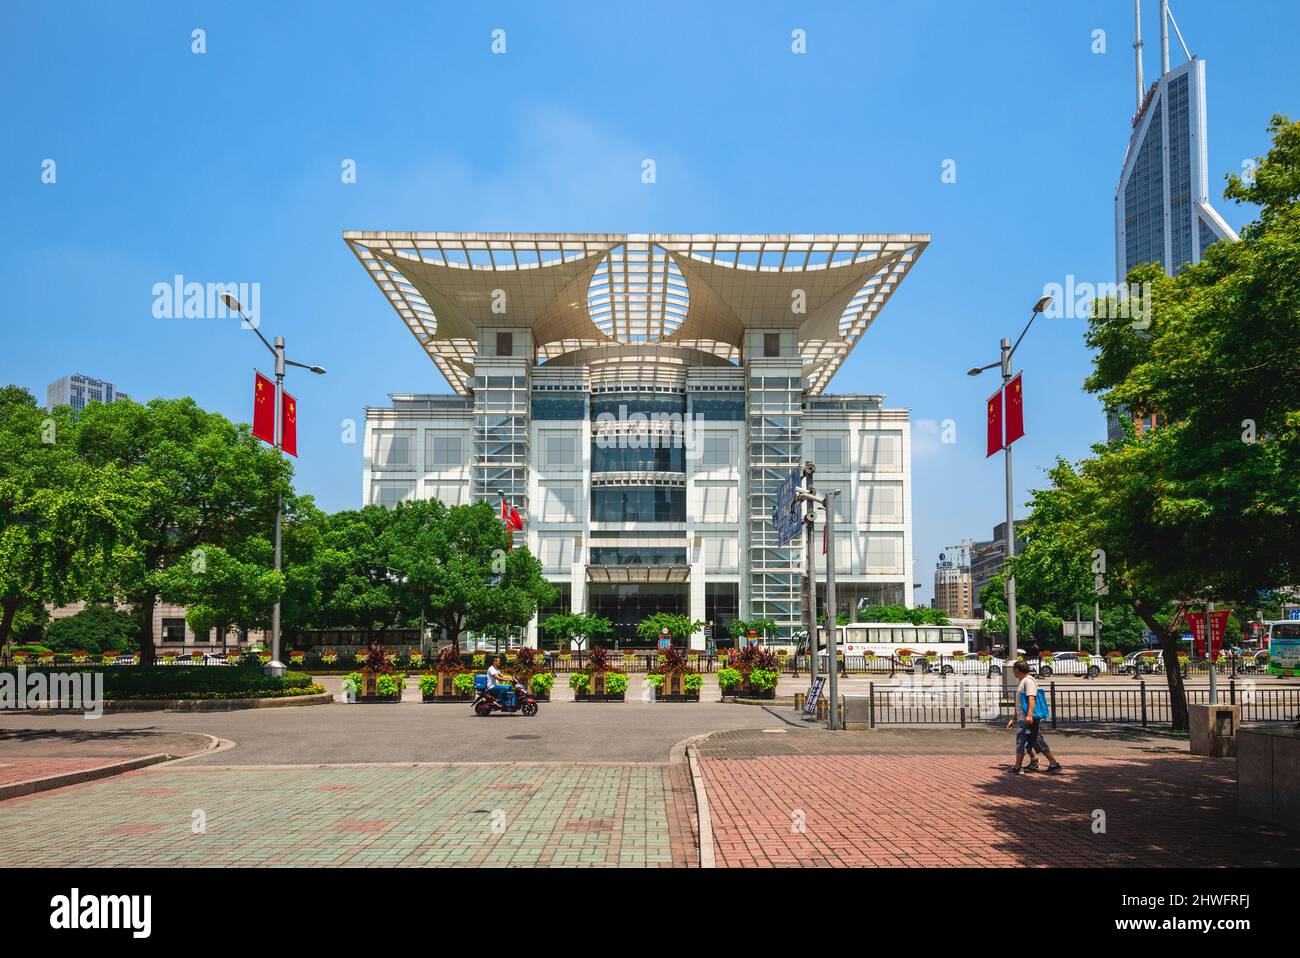 July 27, 2018: Shanghai Urban Planning Exhibition Center, located on Peoples Square in Shanghai, China. It is a six story building which displays Shan Stock Photo